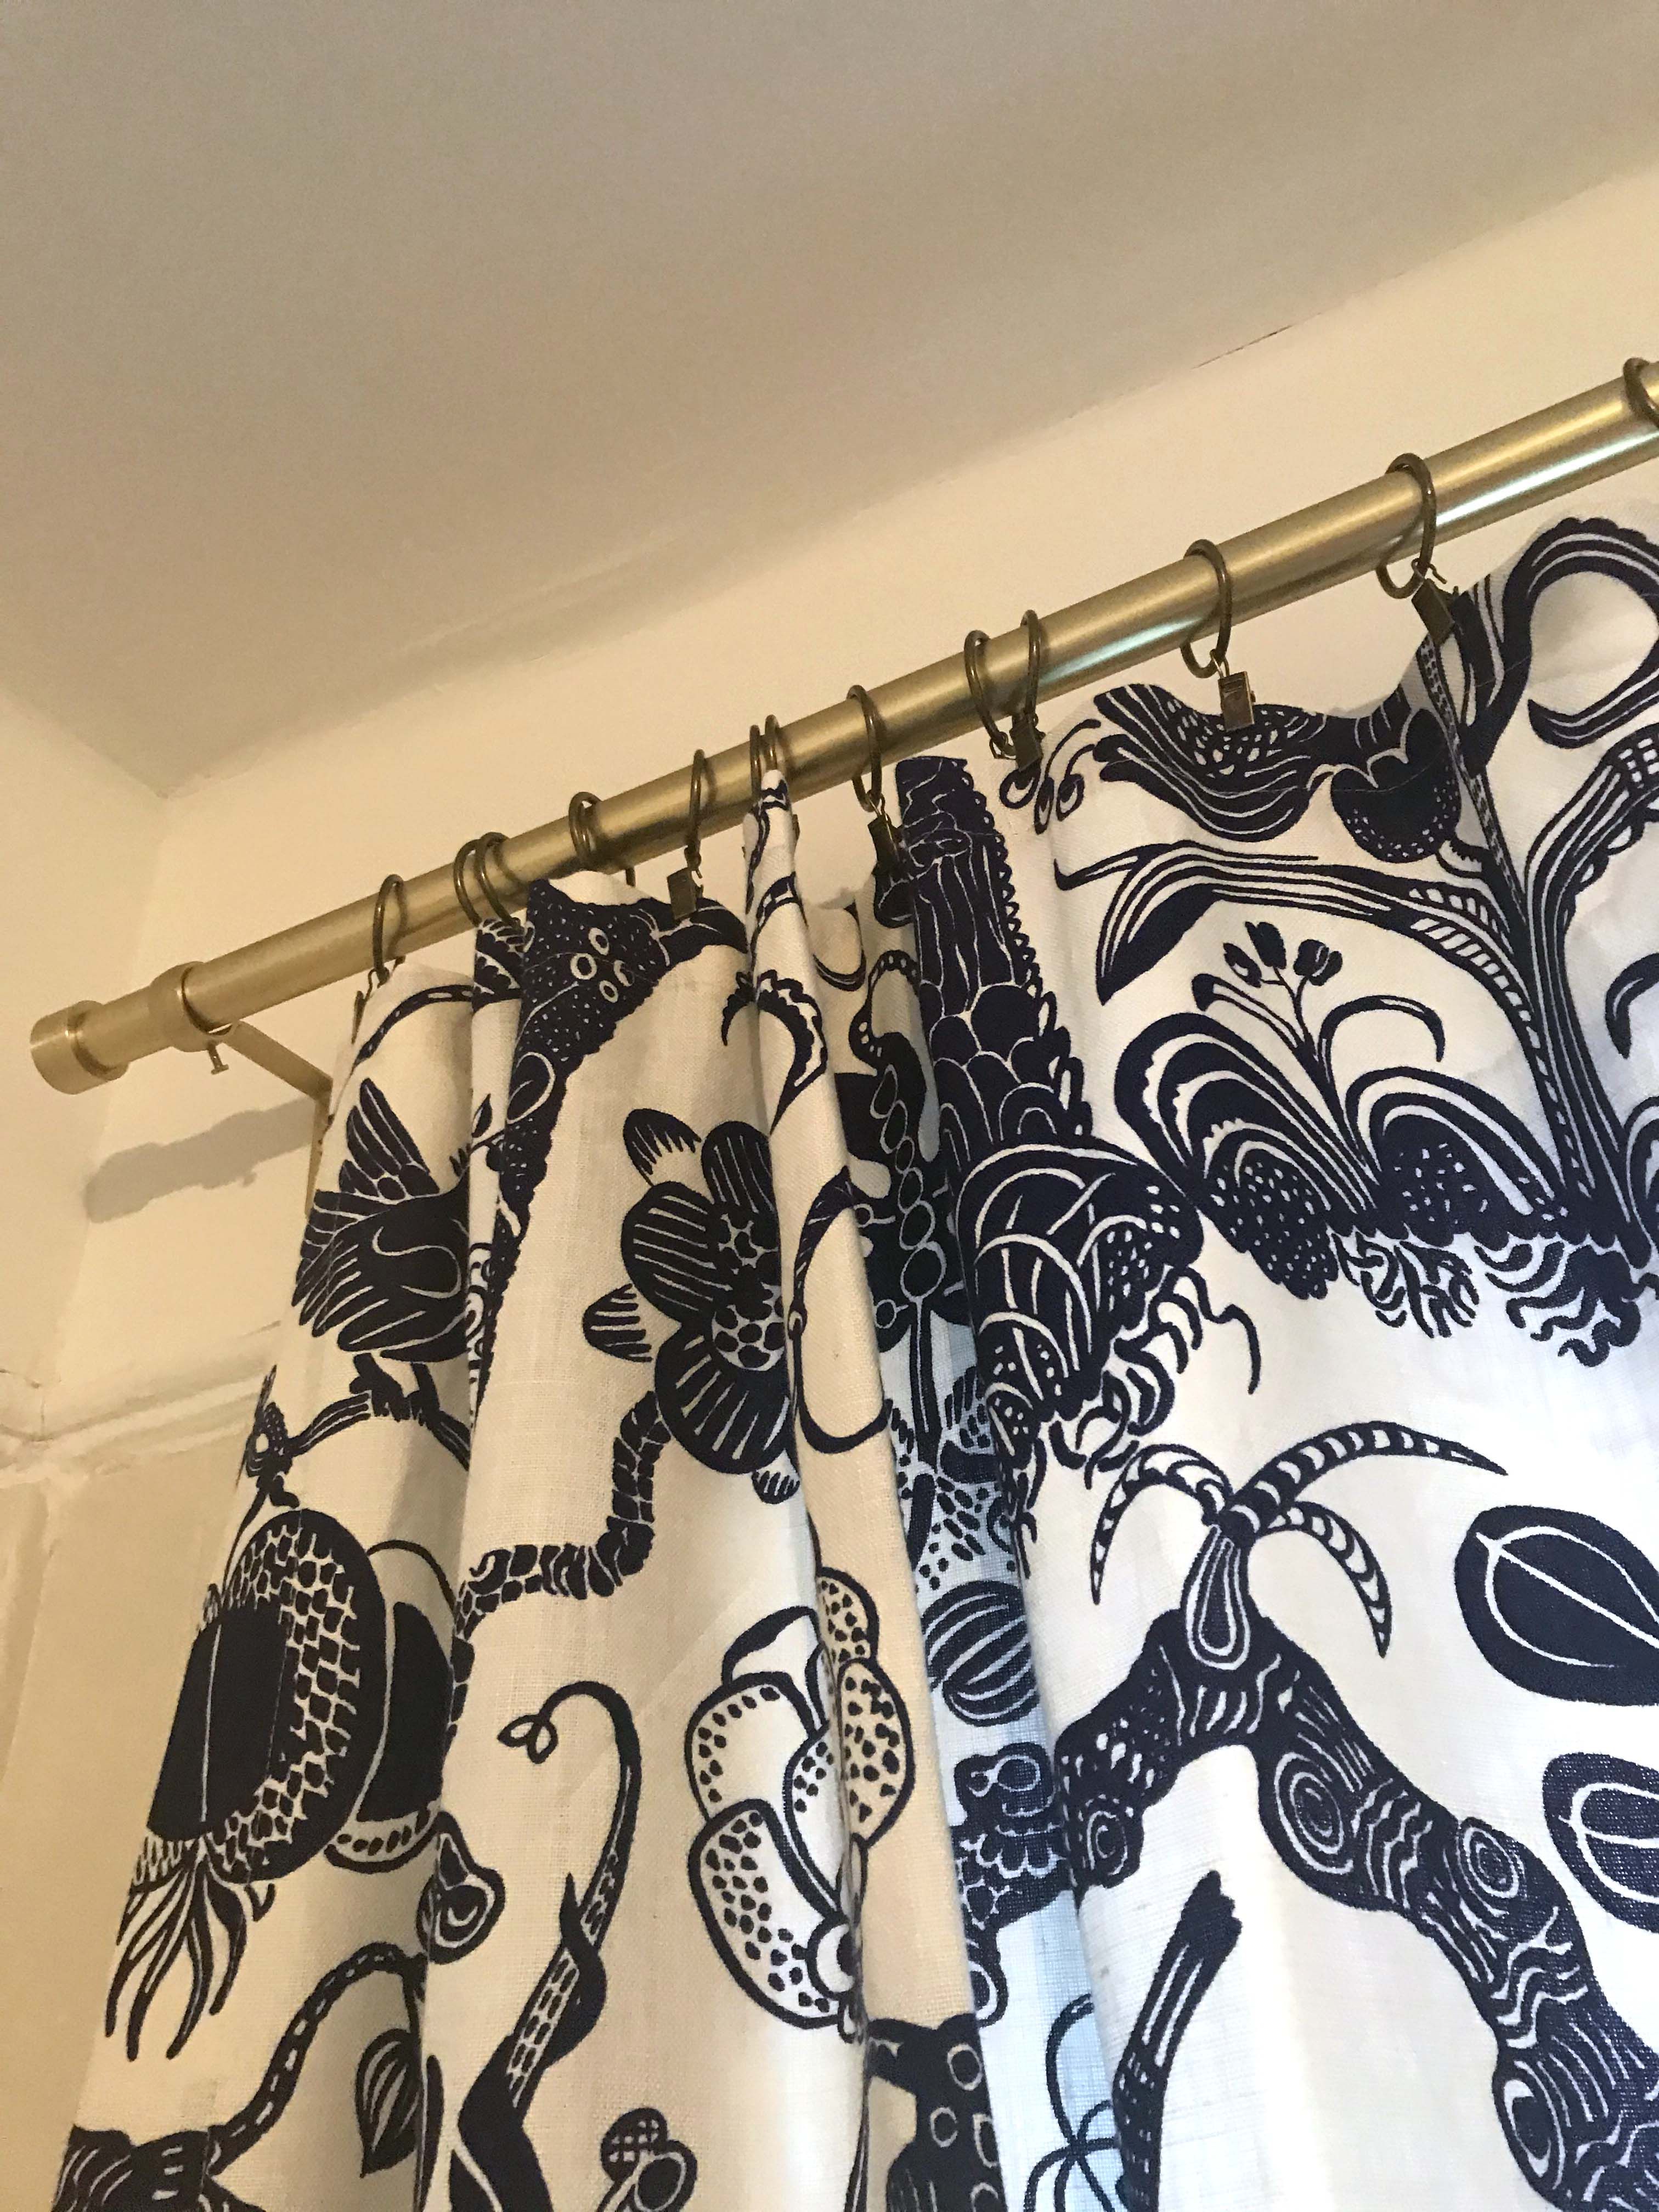 These 7 Curtain Clips Are My Favorite, How To Make Your Own Shower Curtain Rings